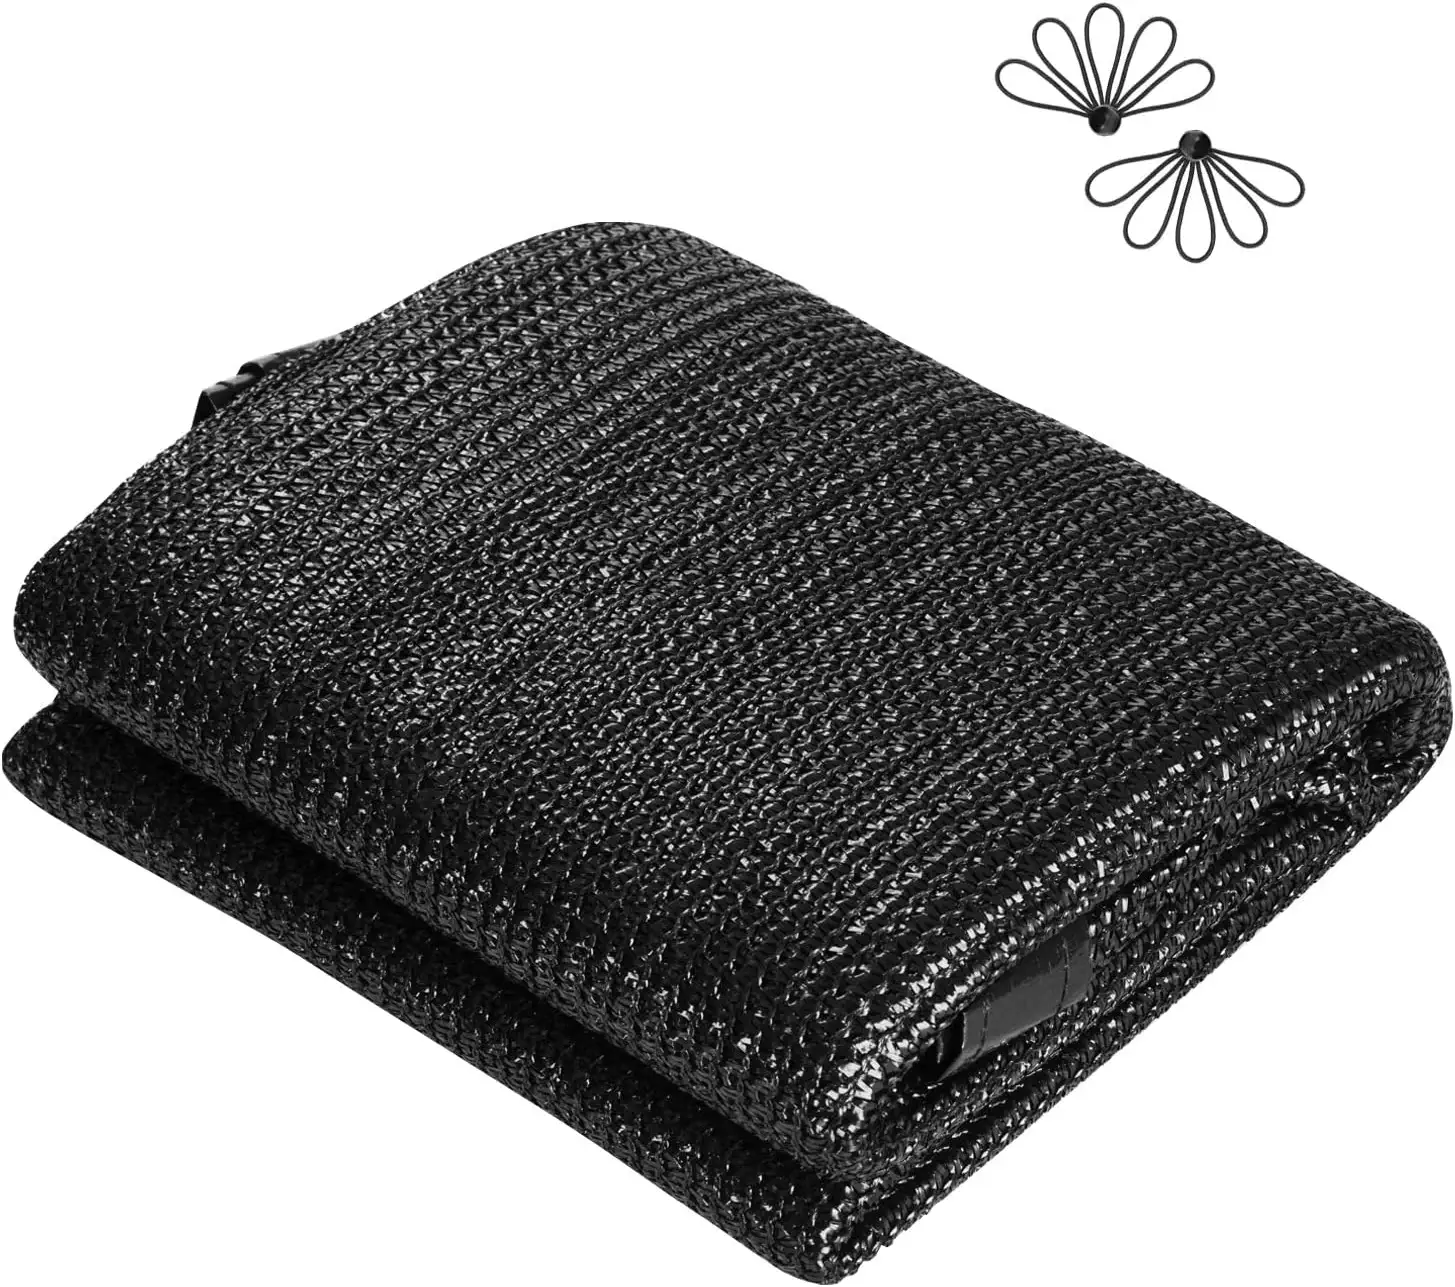 VIVOSUN Sunblock Shade Cloth, 50%-60% Shade Net, 6.5' x 10' Black Garden Shade Mesh with Grommets for Plant Covers, Swimming Pools, Patios, and Yards